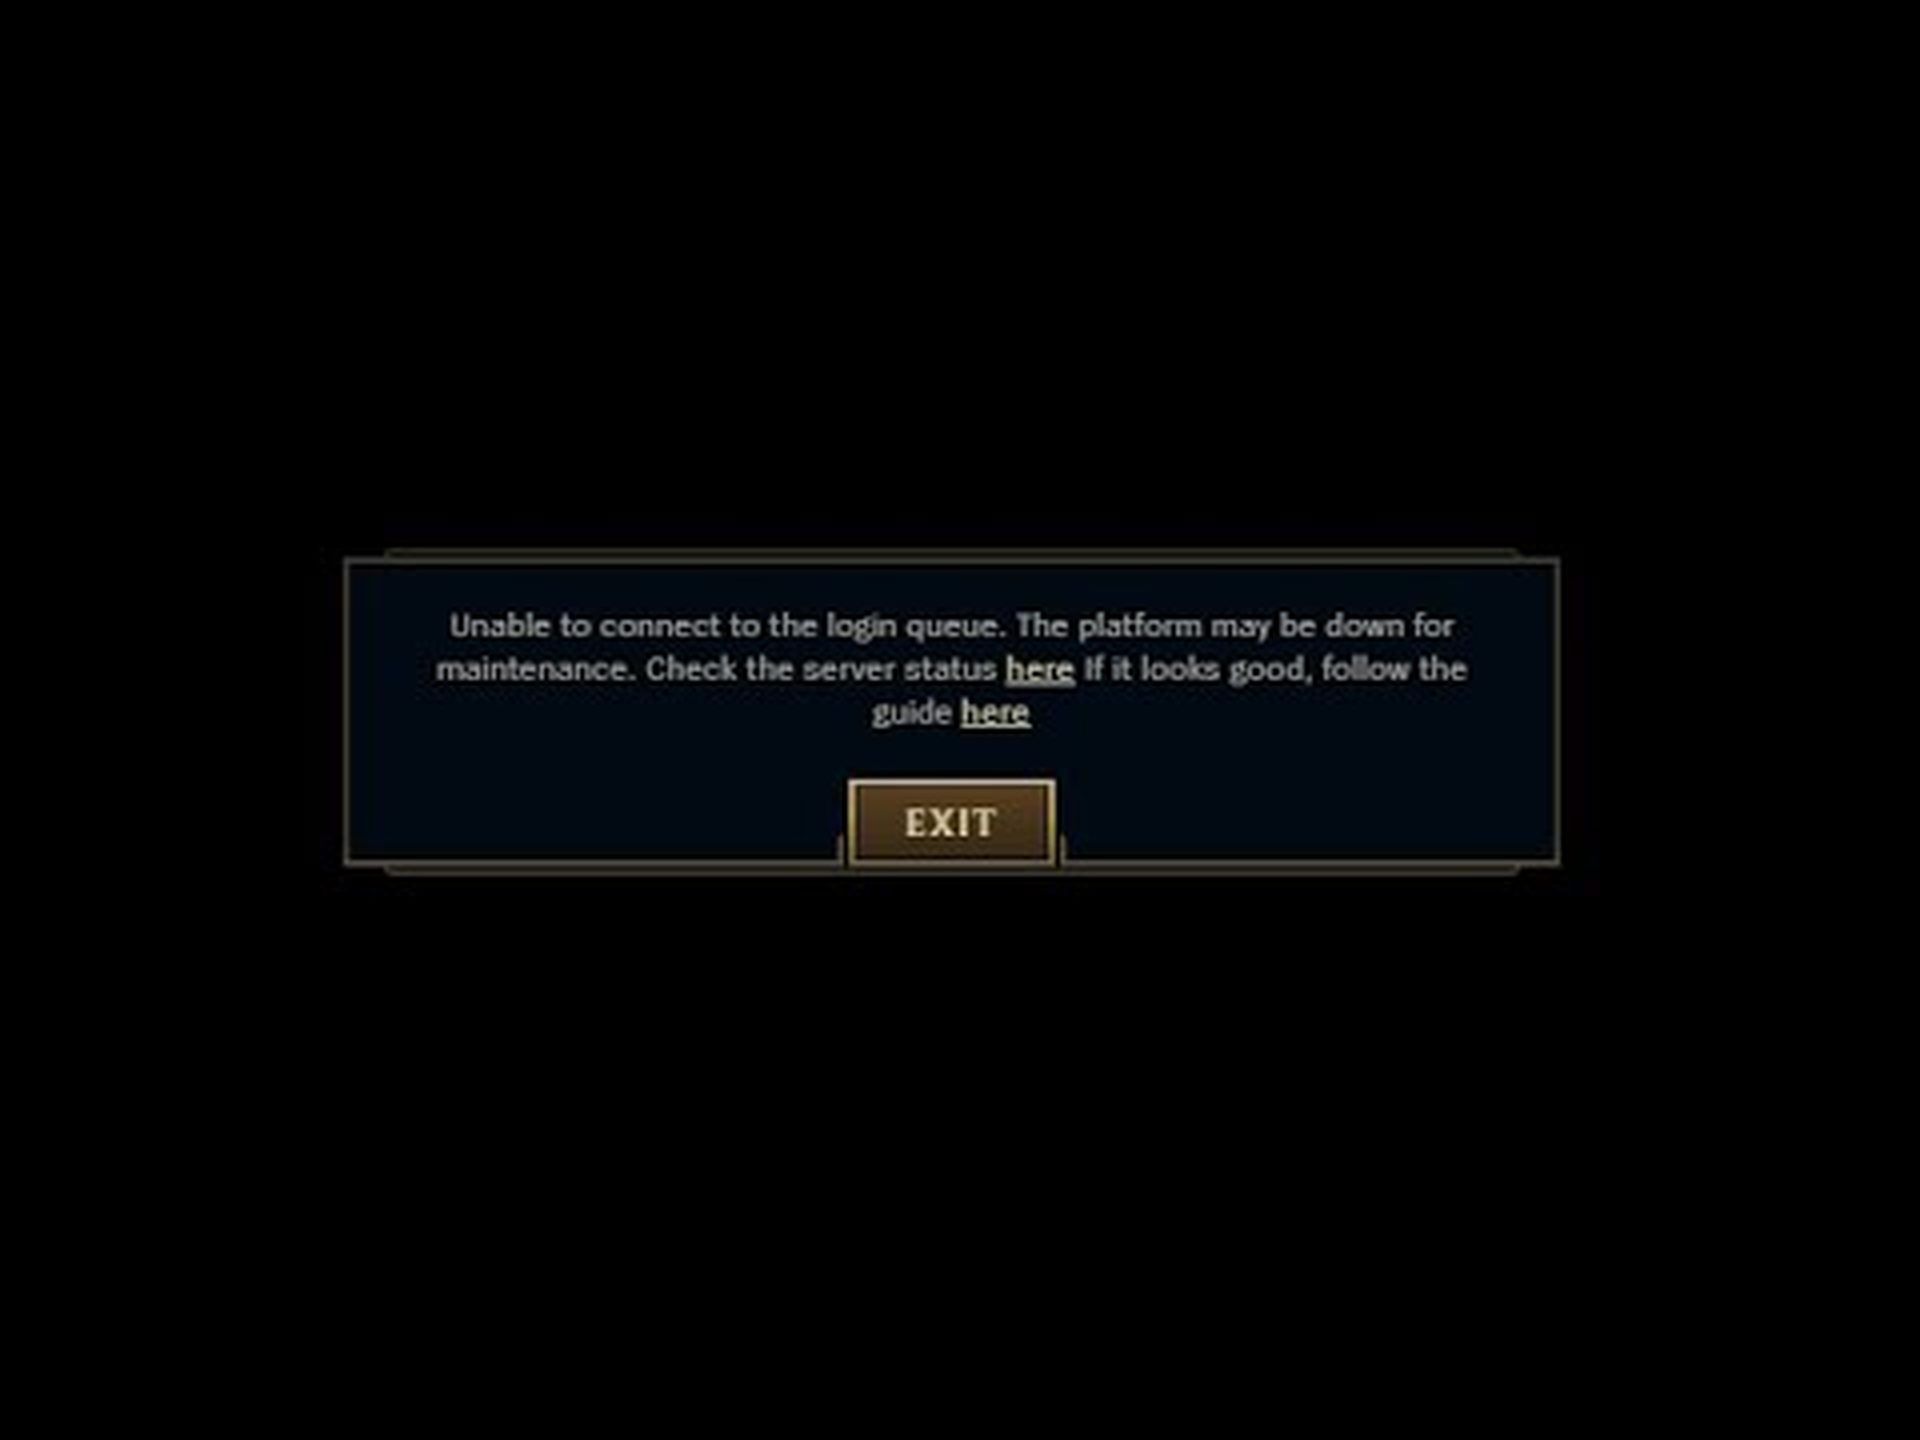 LoL unable to connect to the login queue: How to fix it?